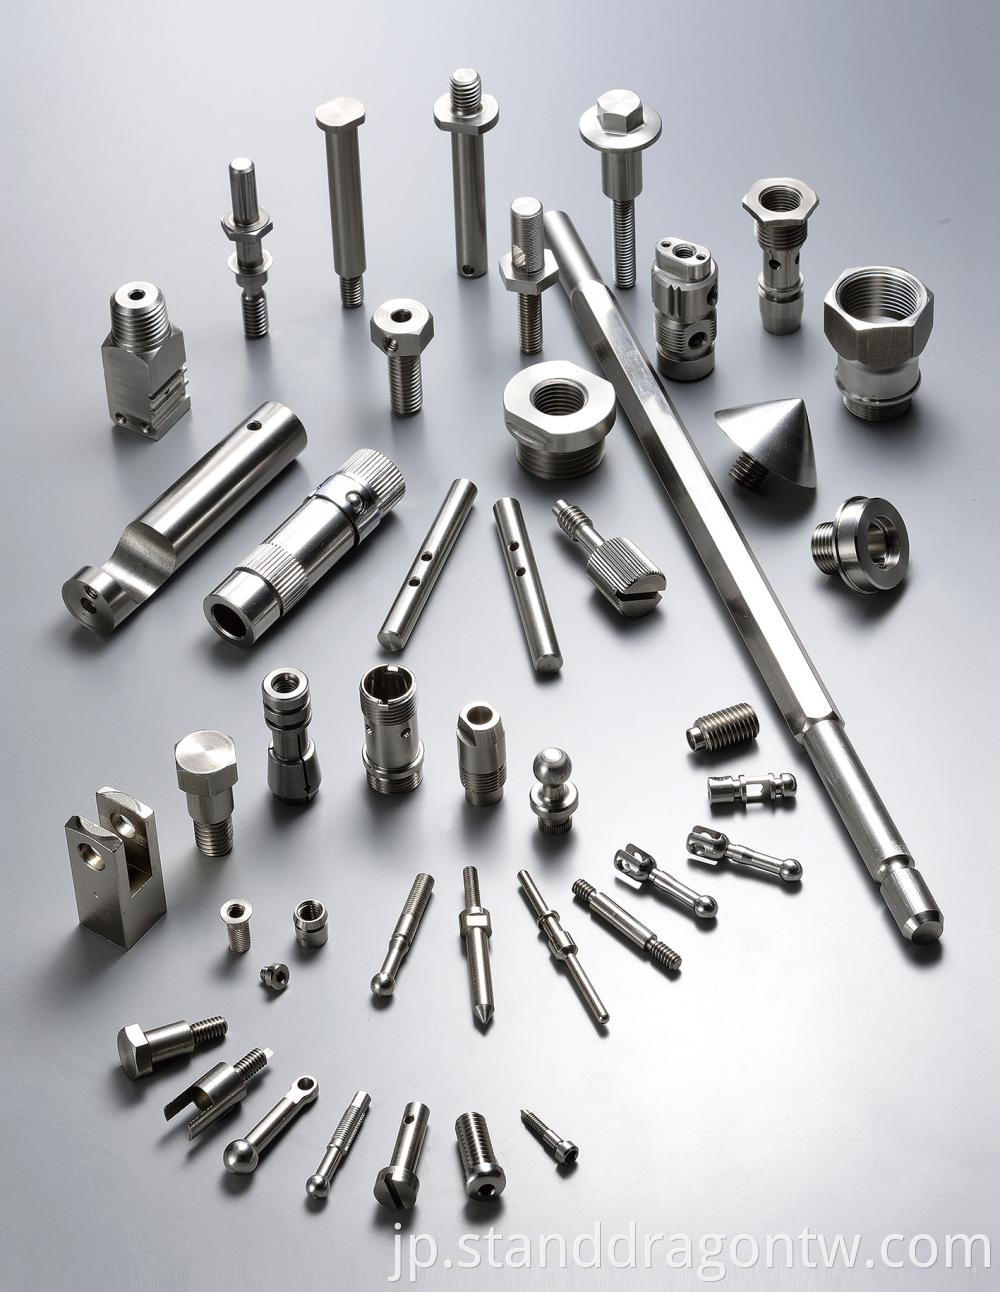 Stainless Steel Drive Shafts